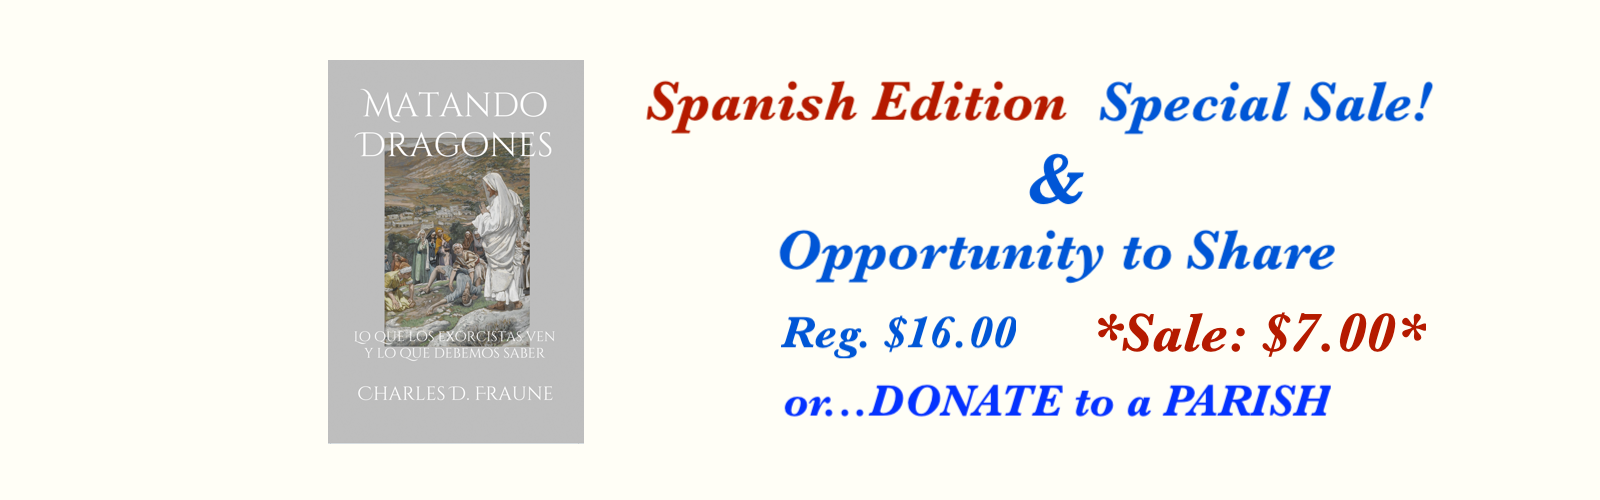 OPPORTUNITY TO HELP! and Huge Discount on Spanish Edition of "Slaying Dragons"